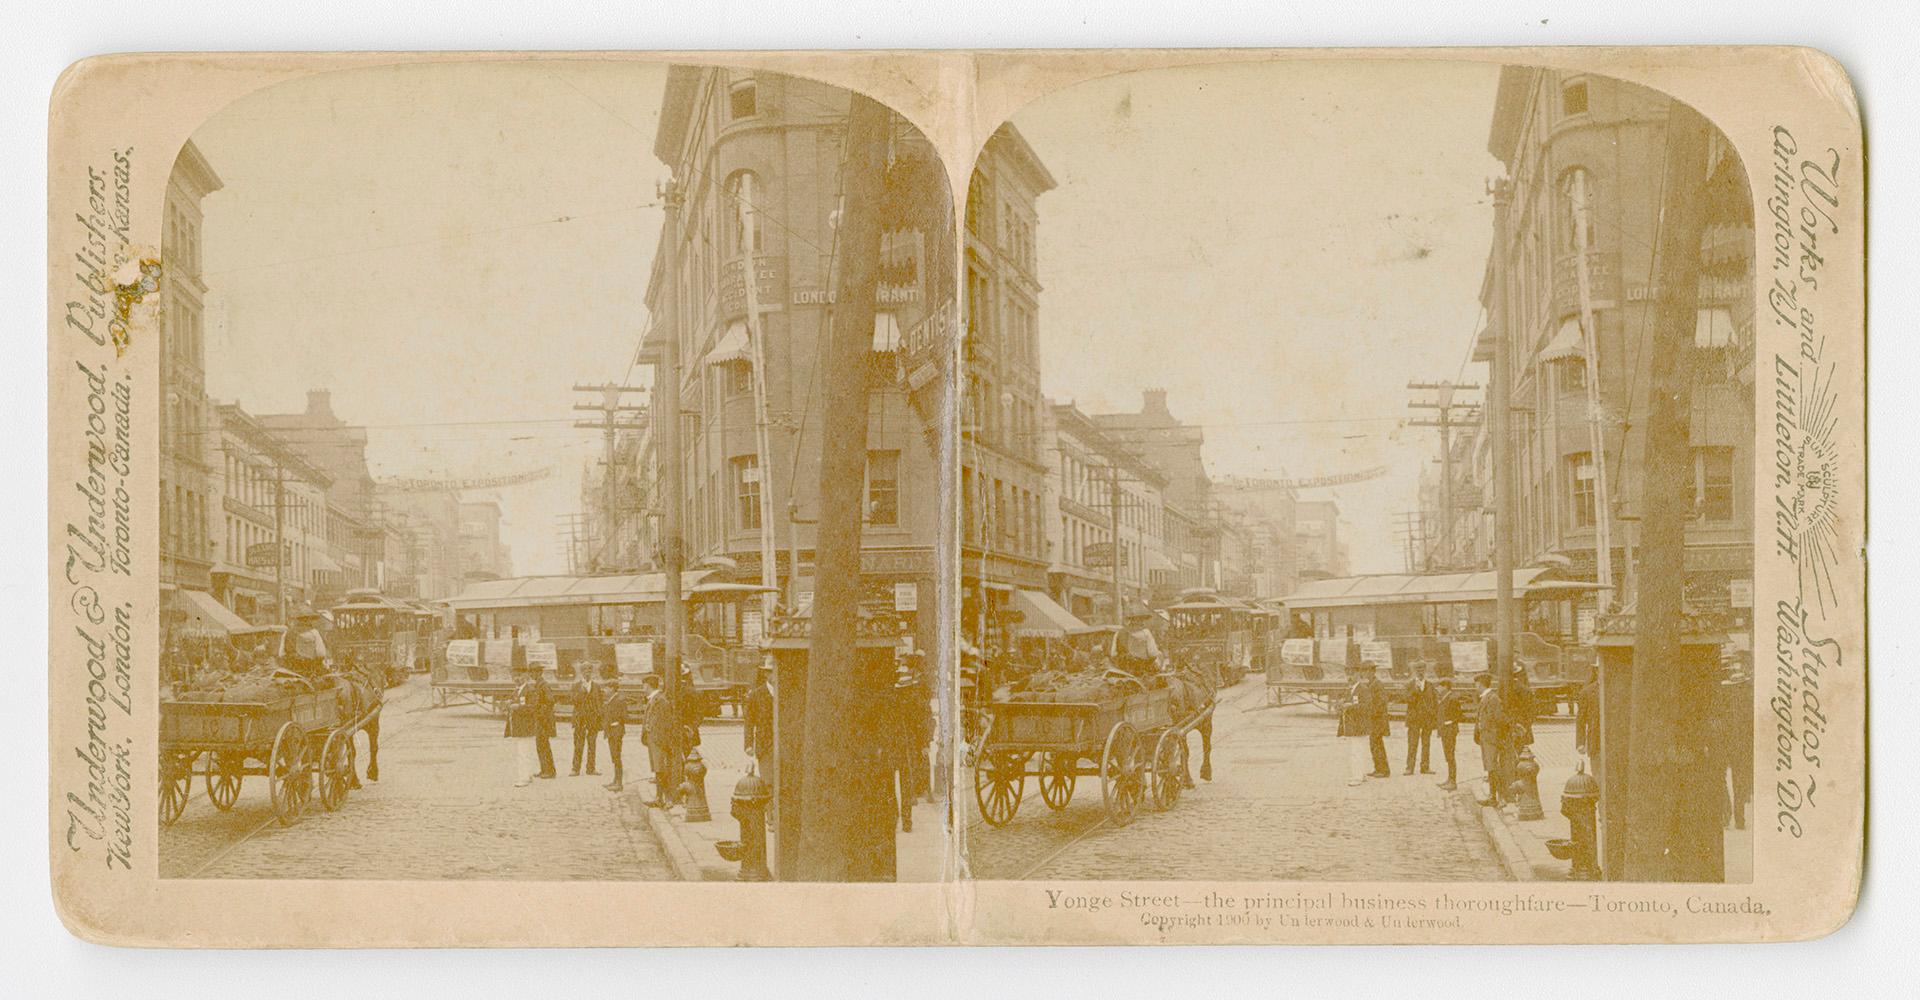 Pictures show a busy downtown street with pedestrians and horse drawn vehicles.